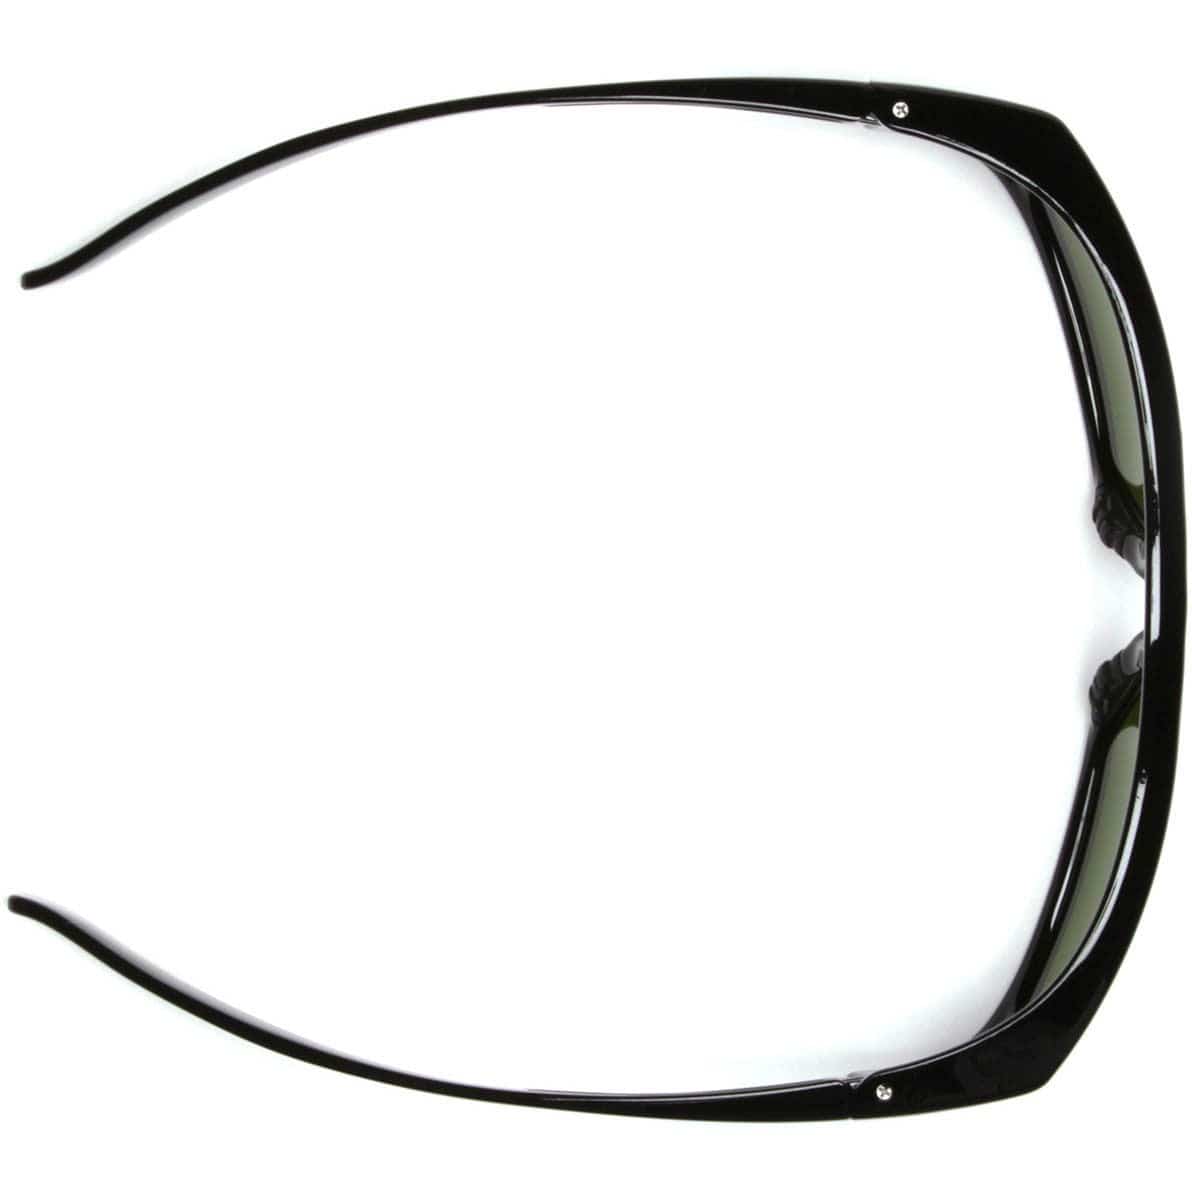 Pyramex Emerge Safety Glasses with Black Frame and Clear Full Magnifying Lens SB7910D Top View